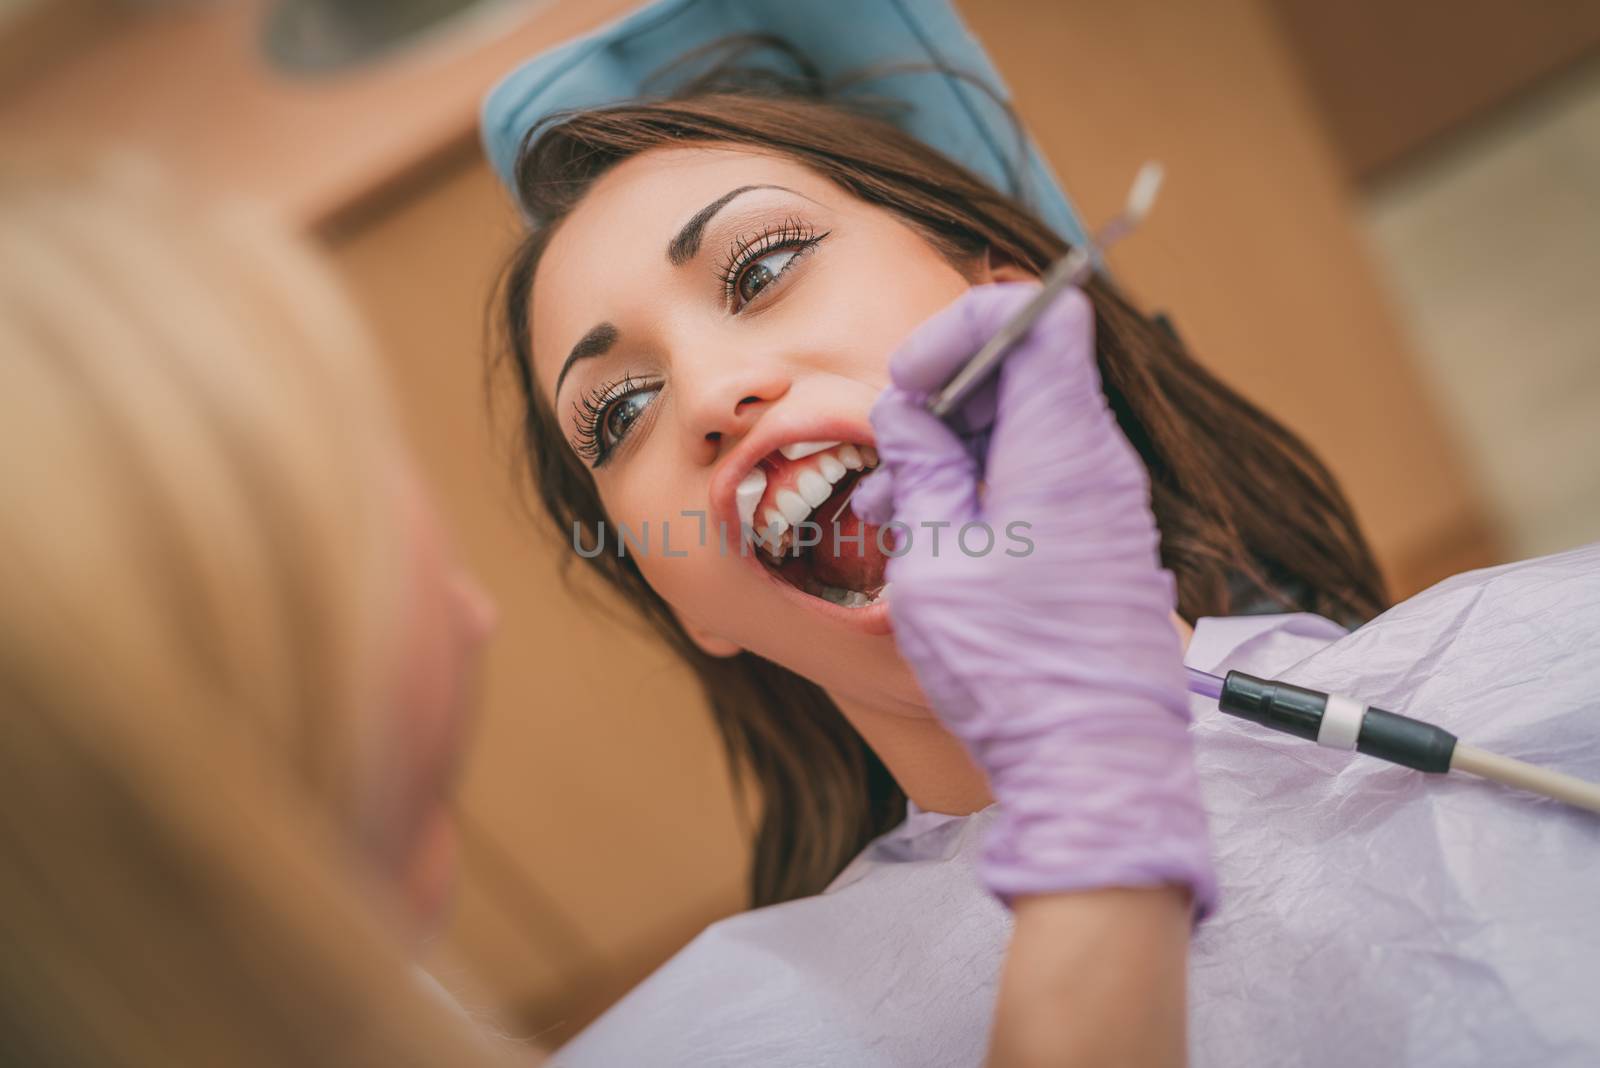 Beautiful young woman in visit at the dentist office. She is sitting on a chair and female dentist checkup teeth on her. Selective focus. Close-up.